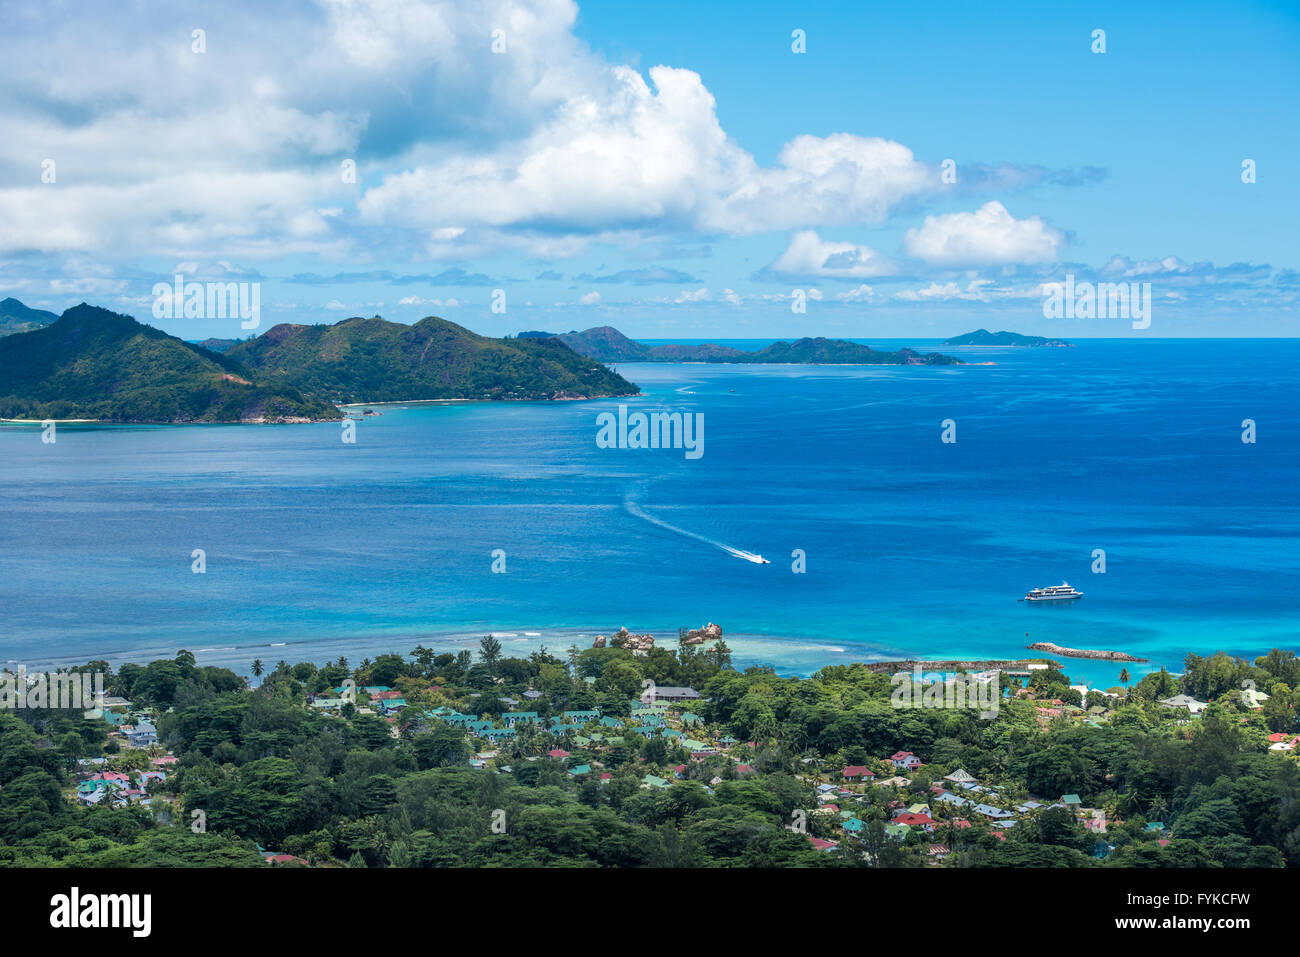 Panorama of La Digue island from Nid d’Aigle viewpoint, Seychelles Stock Photo